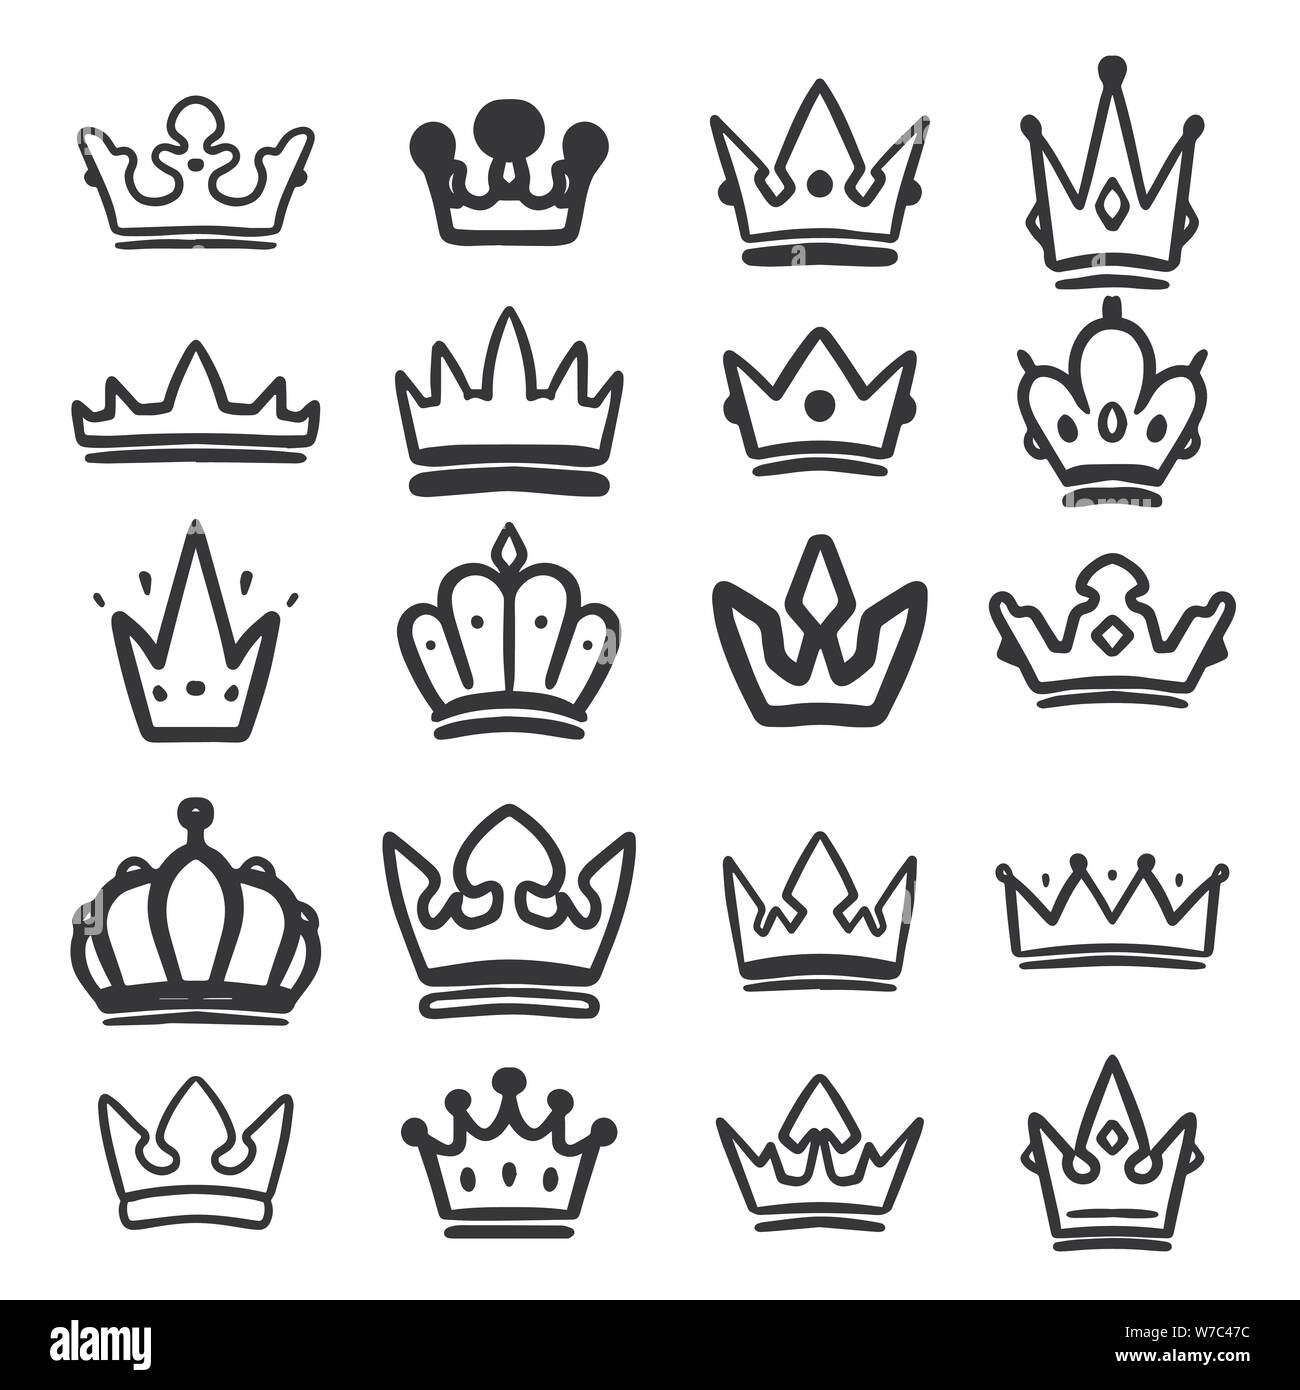 Set of hand drawn crowns isolated on white background. Design element for poster, card, banner, t shirt, emblem, sign. Vector illustration Stock Vector